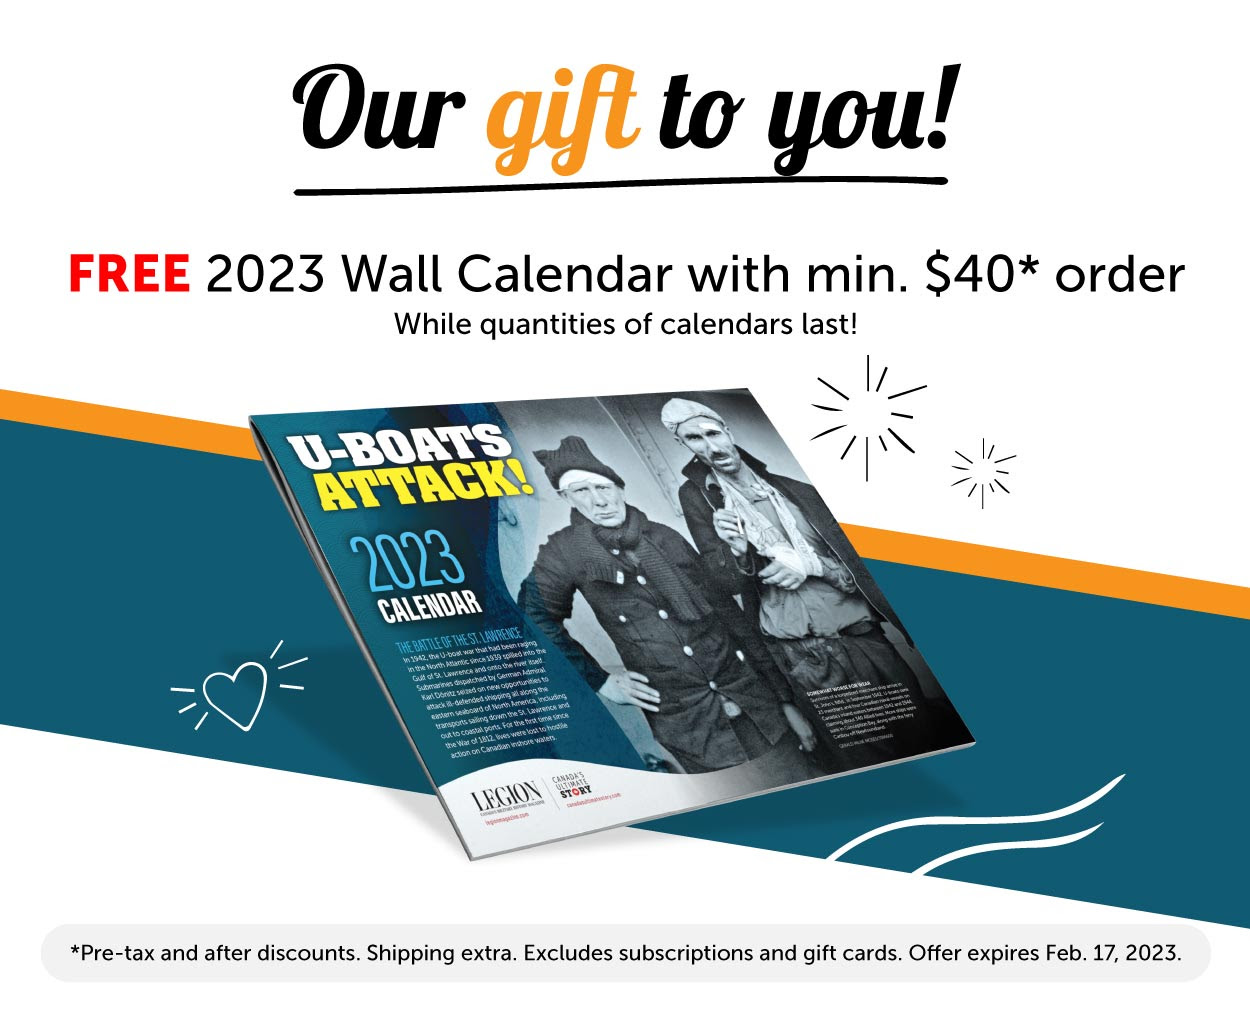 Our gift to you! FREE Calendar